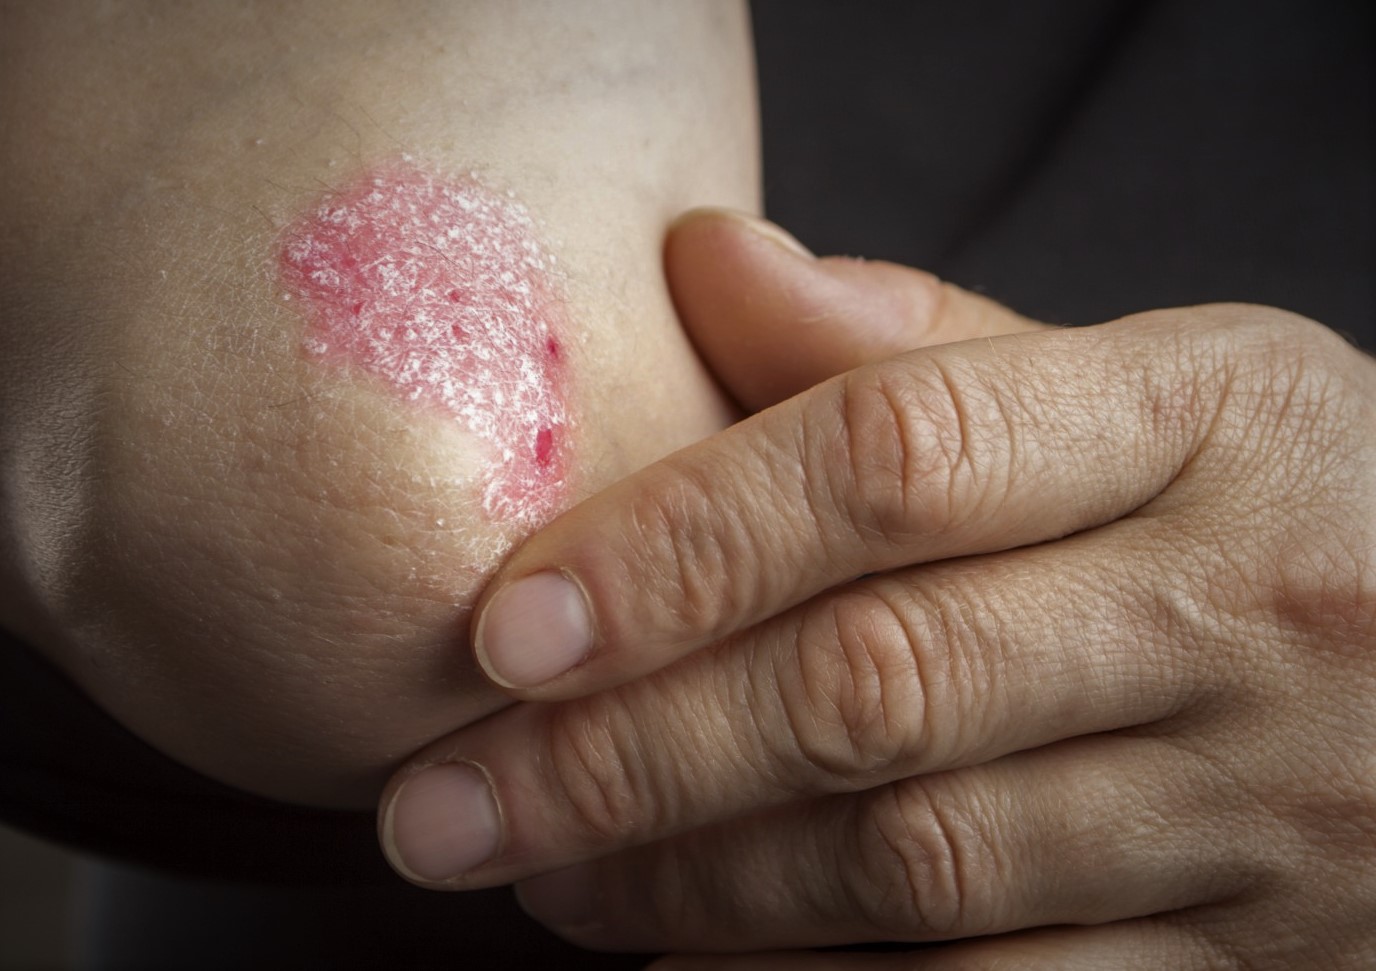 Psoriasis Treatment Market Size, Share, Growth & Analysis Report 2026